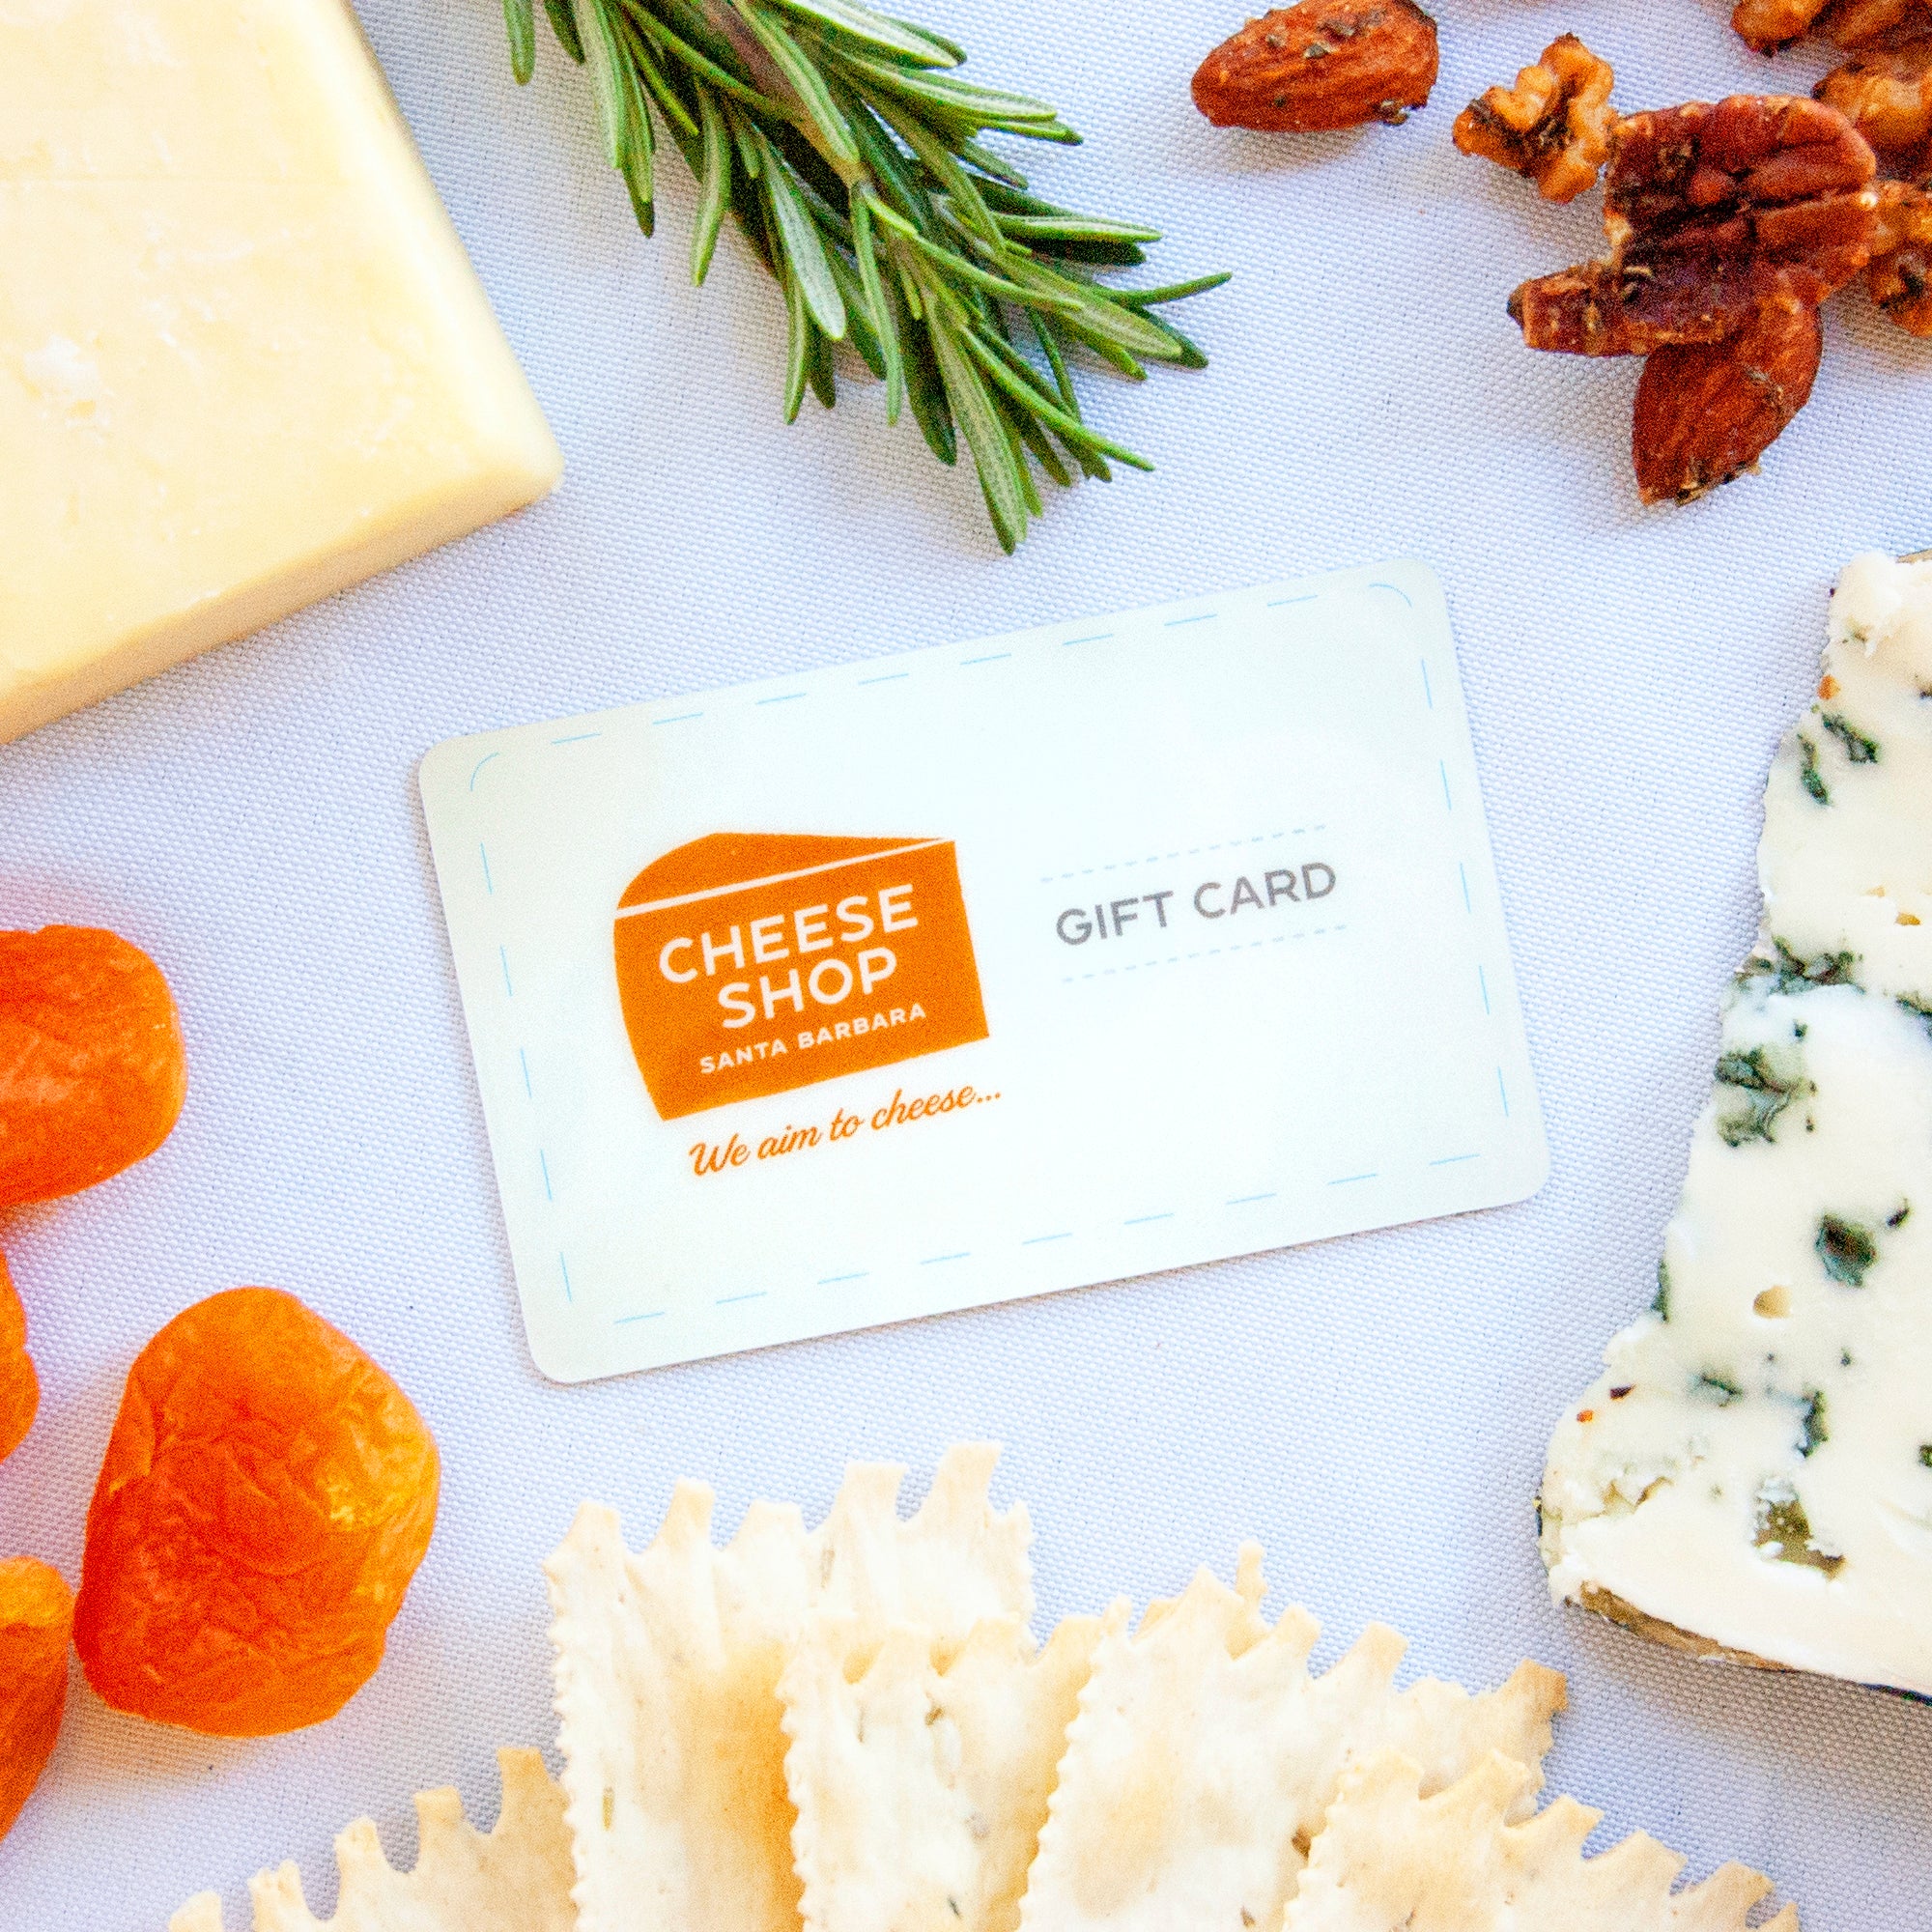 Gift card next to cheese, nuts and fruit